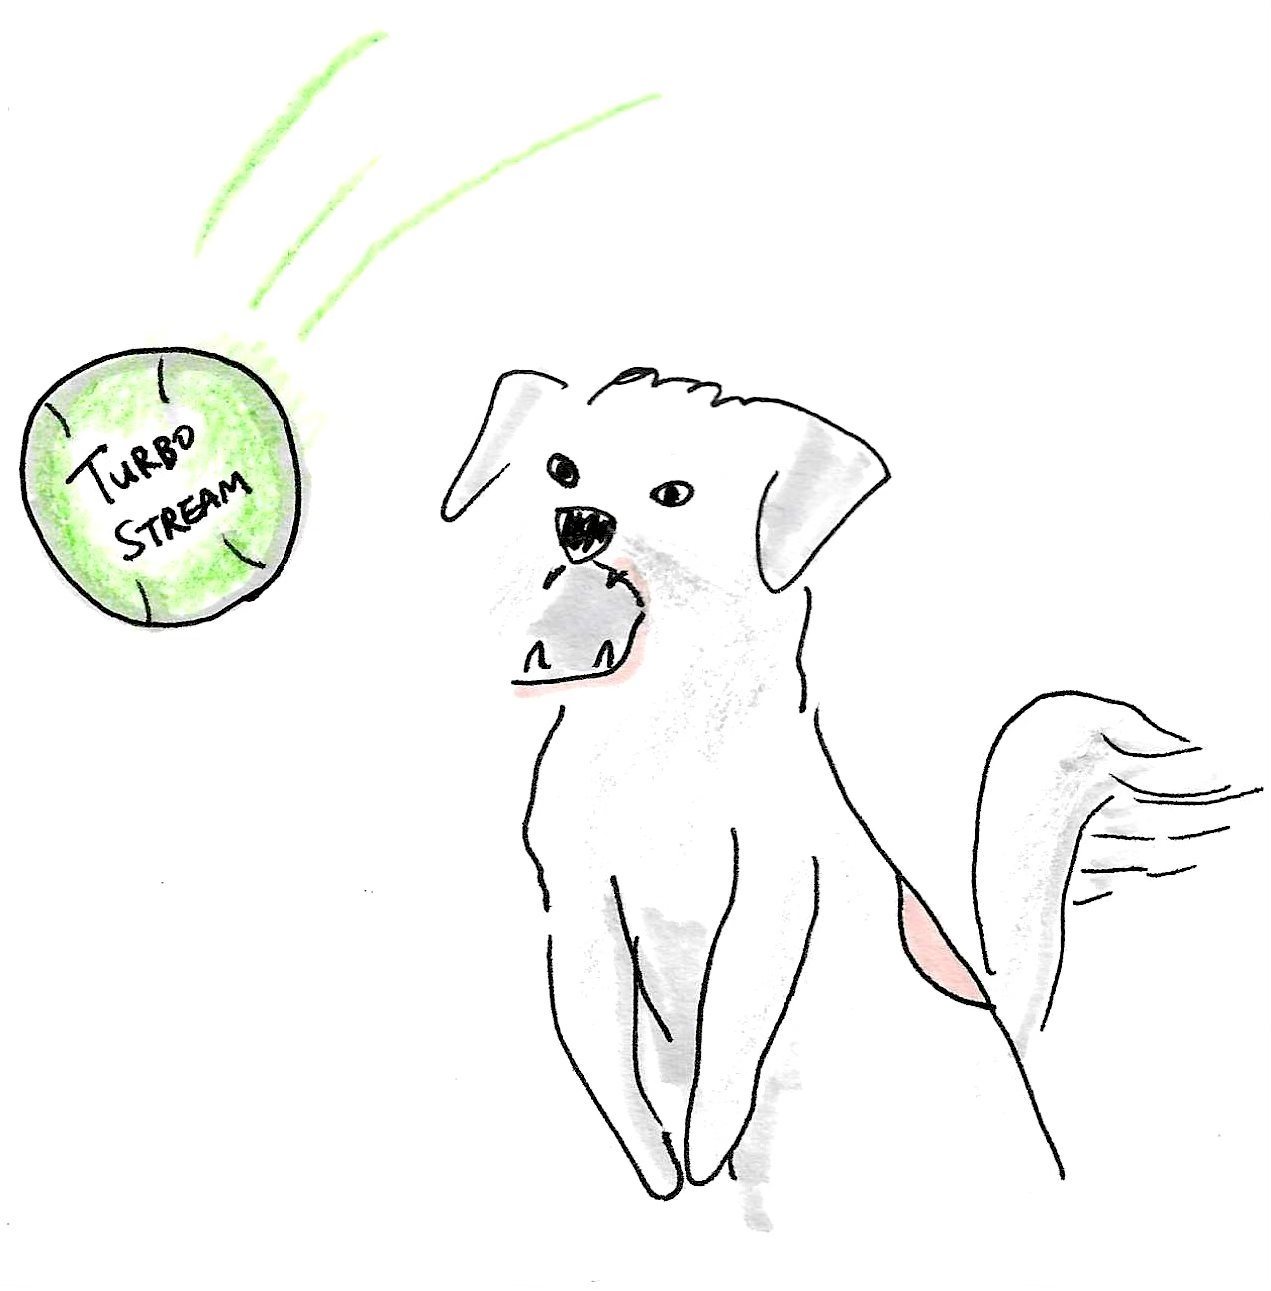 Dog, who sometimes responds to the name Ben, going after a ball labelled Turbo Stream